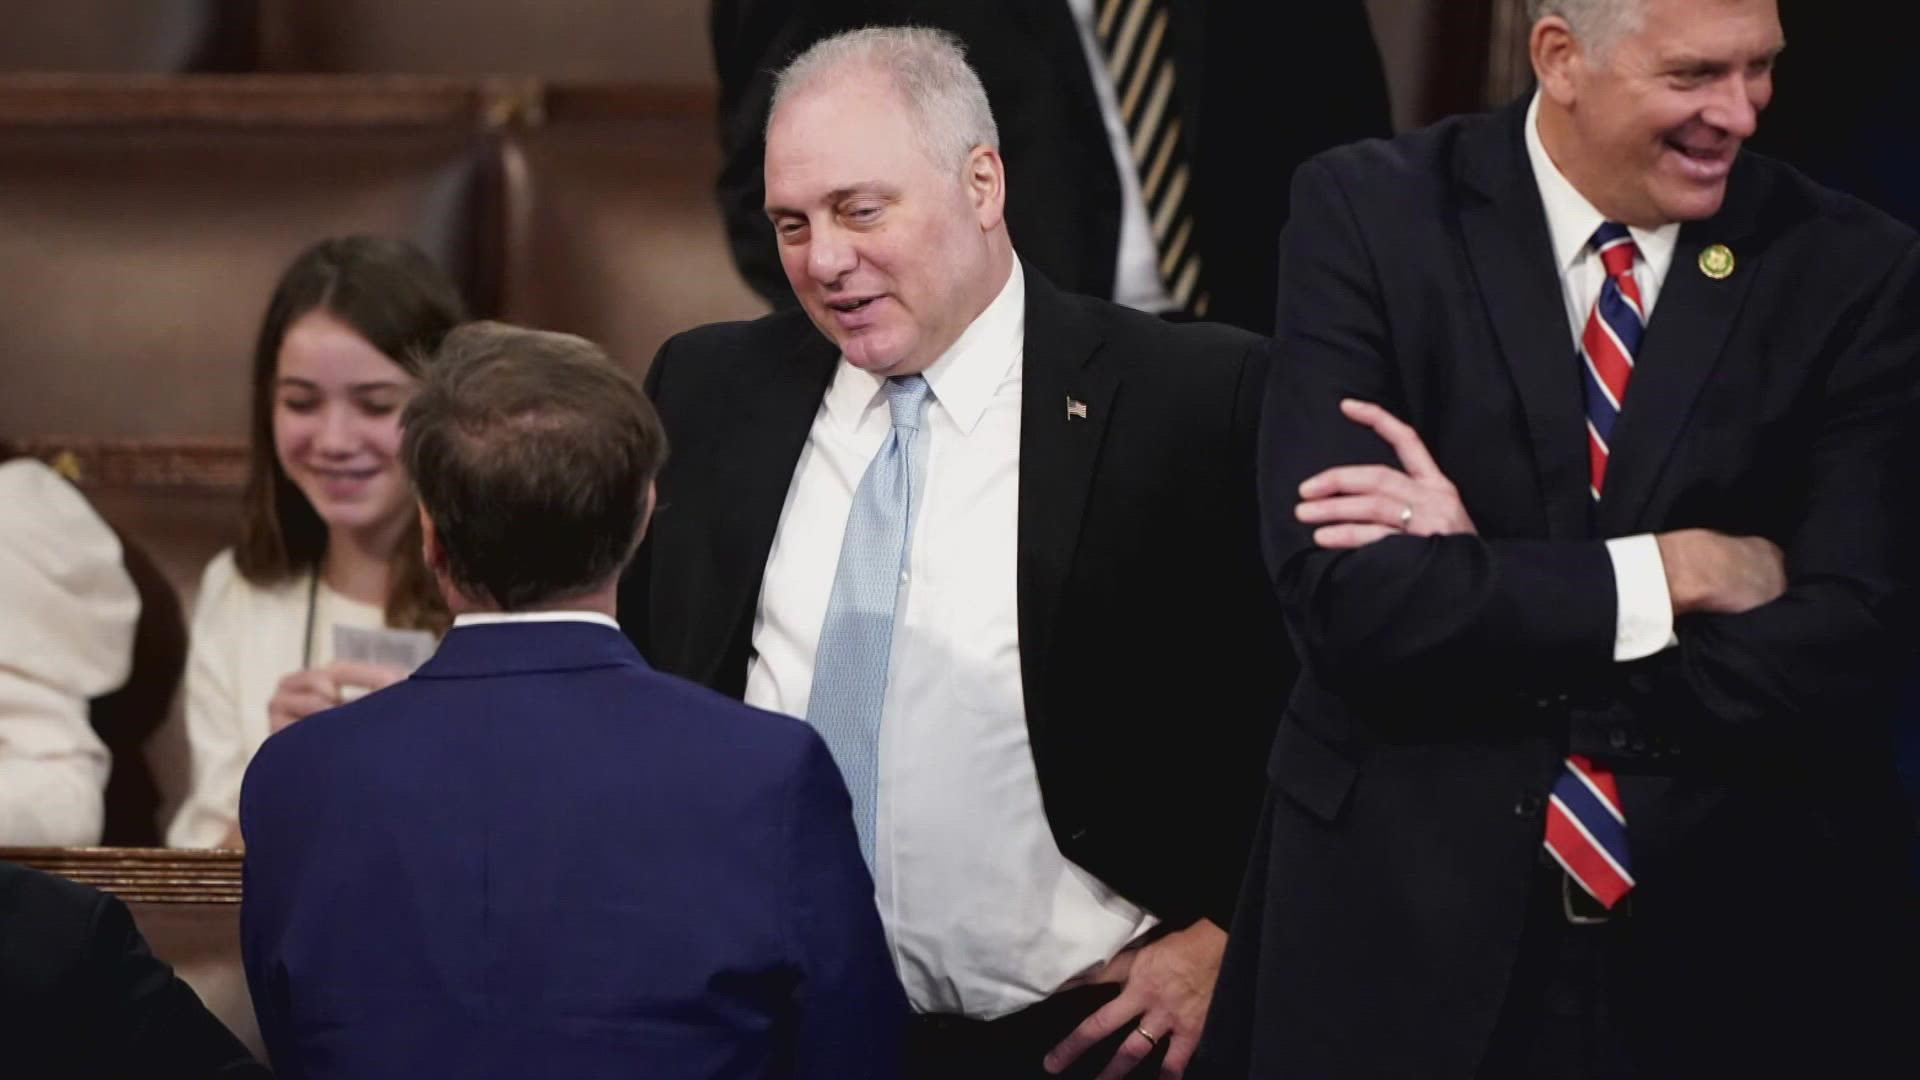 Steve Scalise may have an opportunity to become the new speaker if Kevin McCarthy gives up.